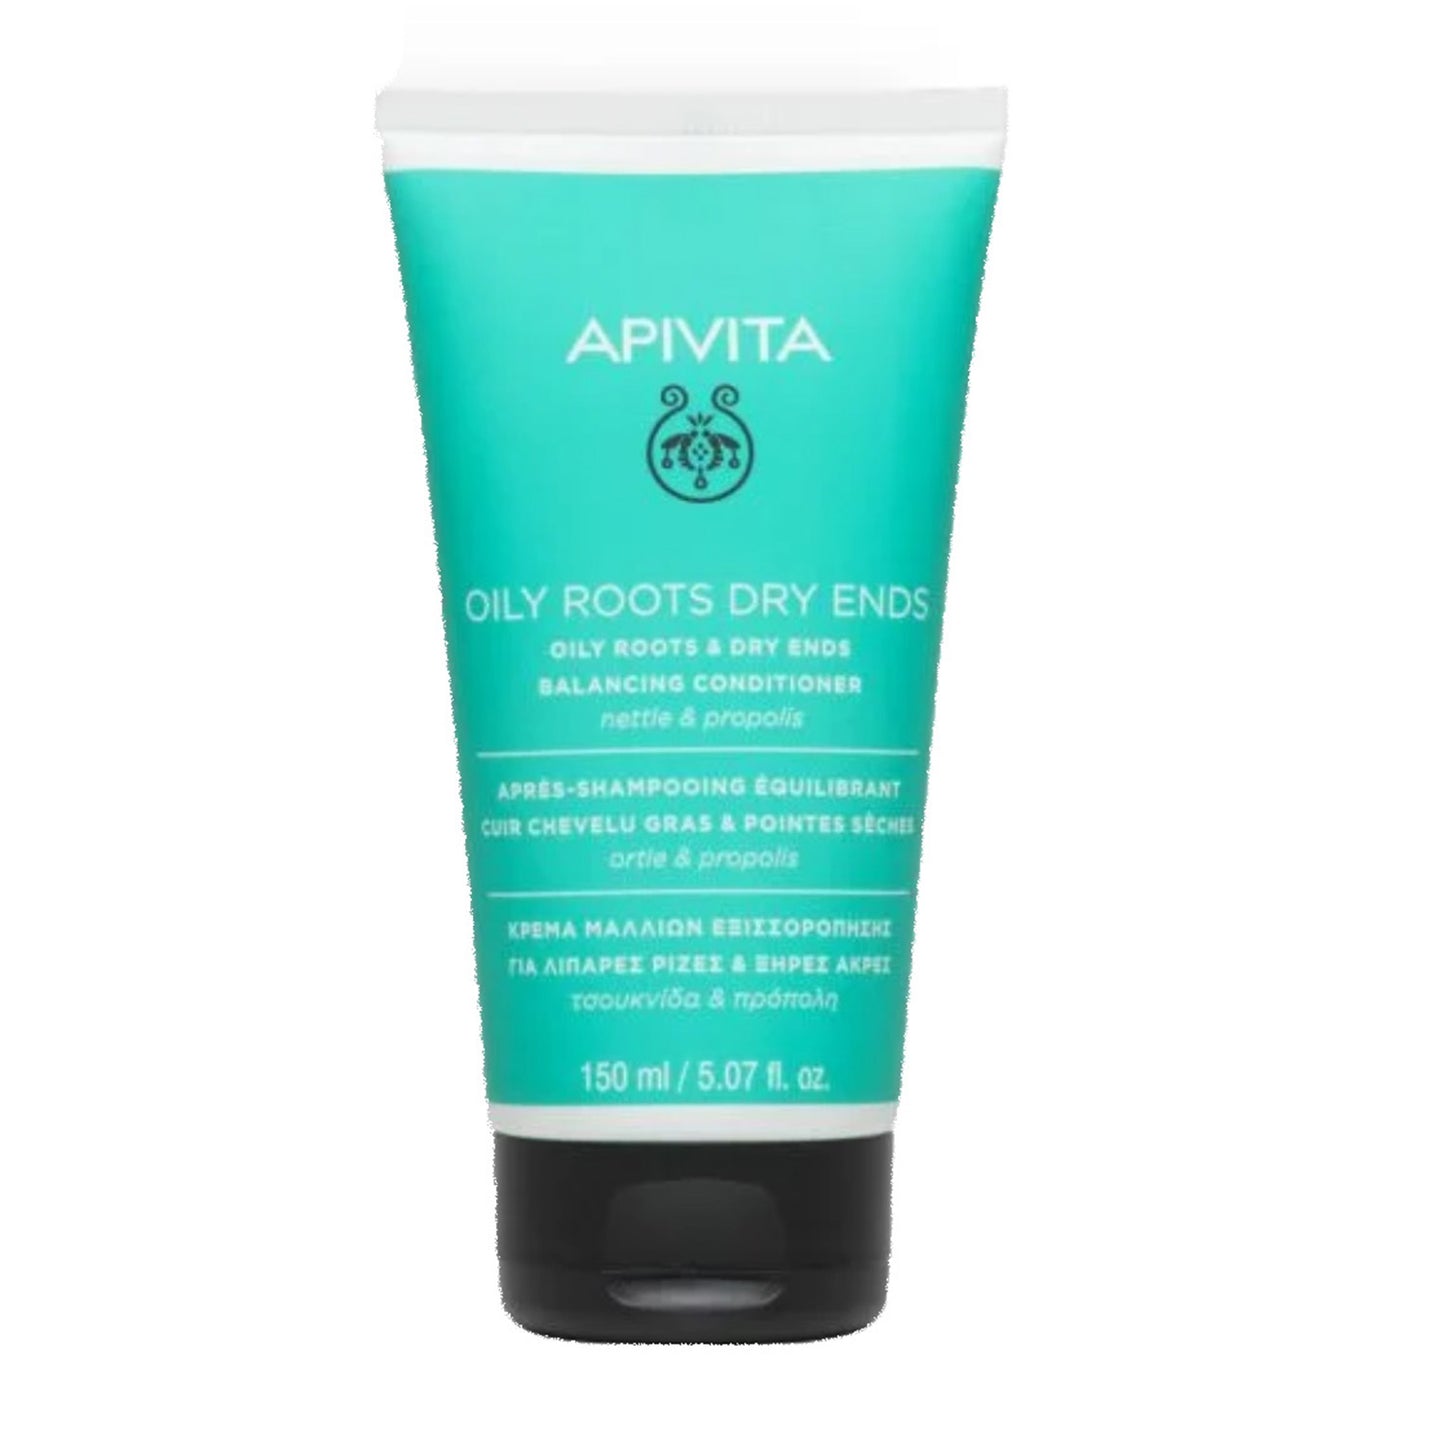 Apivita Oily routes dry ends Hair Conditioner is designed specifically for hair with oily roots and dry ends. Its lightweight texture moisturises, repairs dry damaged ends, and provides nourishing balance with nettle and propolis extracts.